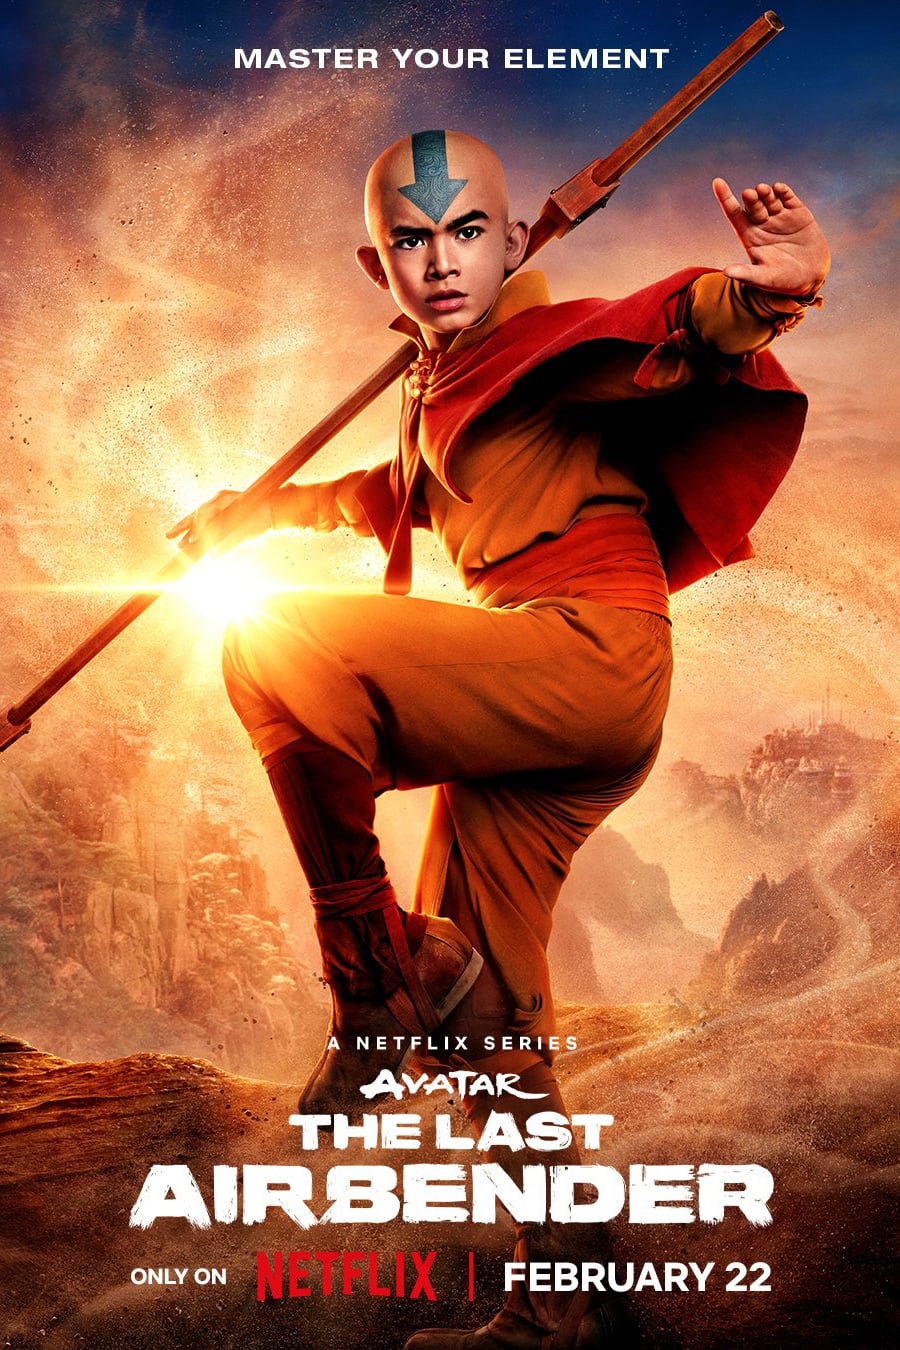 Nội dung cốt truyện của phim The Last Airbender